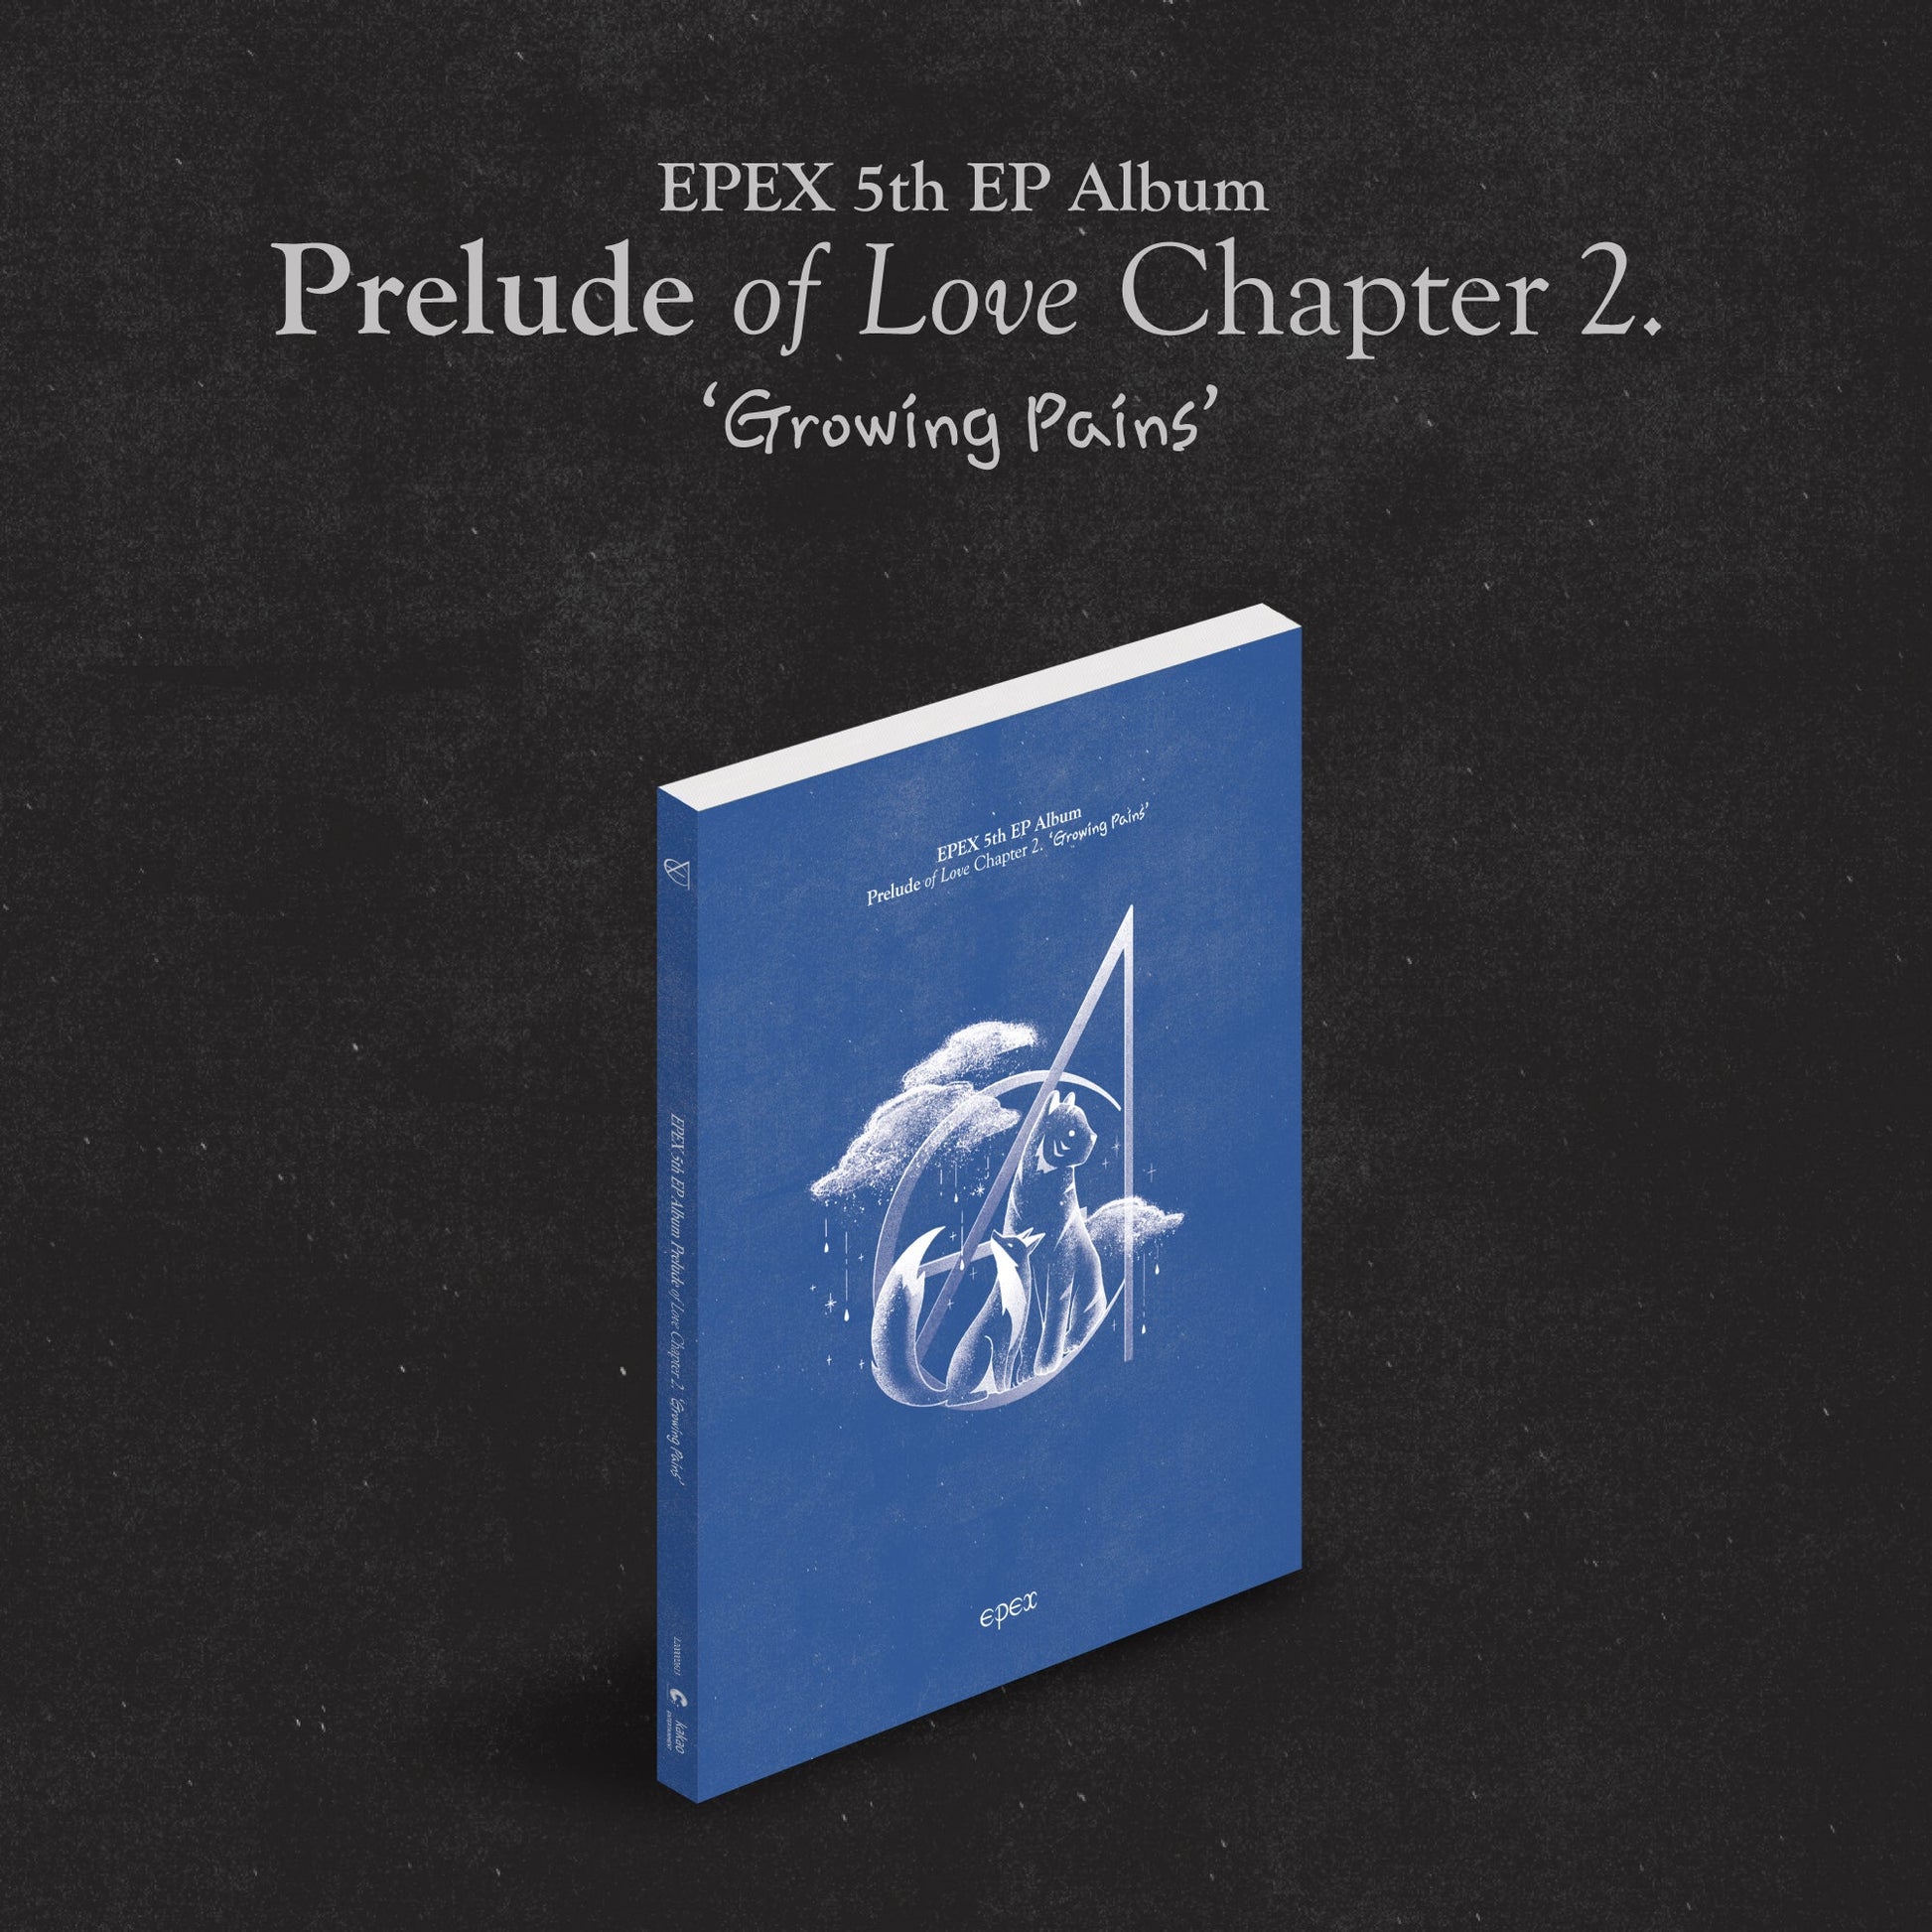 EPEX 5TH EP ALBUM 'PRELUDE OF LOVE CHAPTER 2' CLOUD VERSION COVER